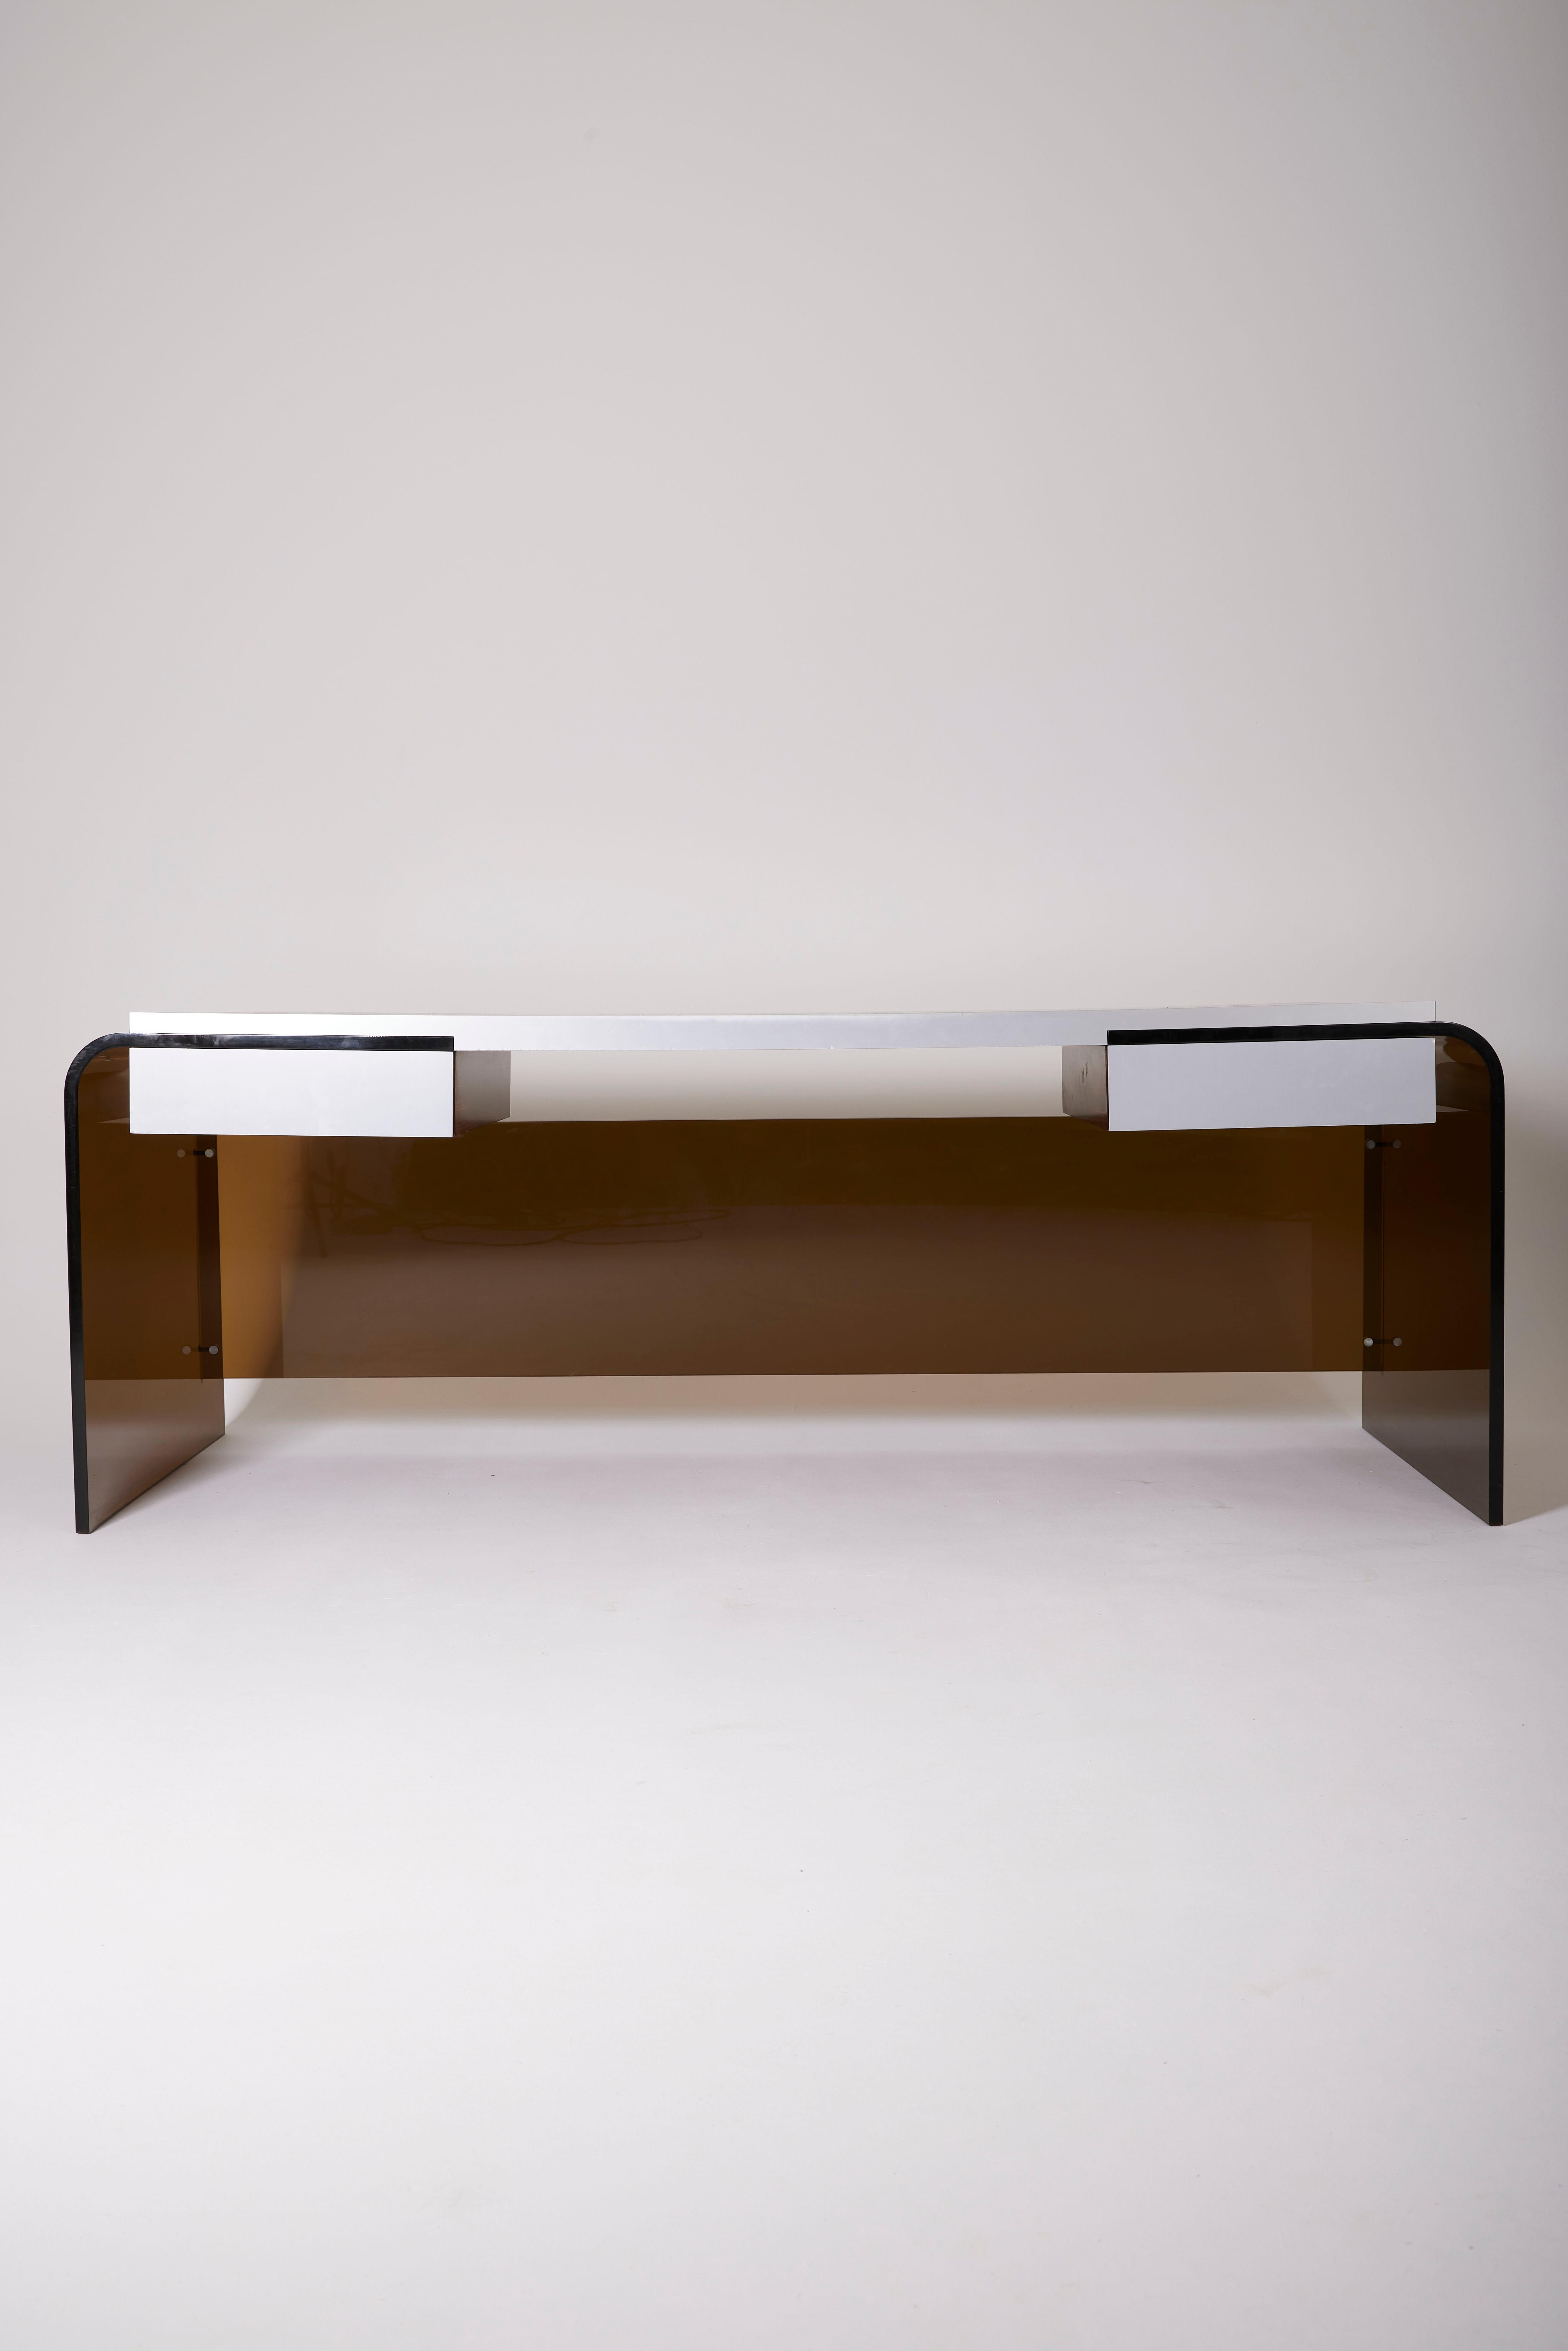 Large desk in Altuglas and ebony in the style of Joseph André Mott from the 1970s. The top is made of Macassar ebony with brushed steel details, and the base is in smoked plexiglass. The desk is equipped with 2 drawers beneath the top. In good